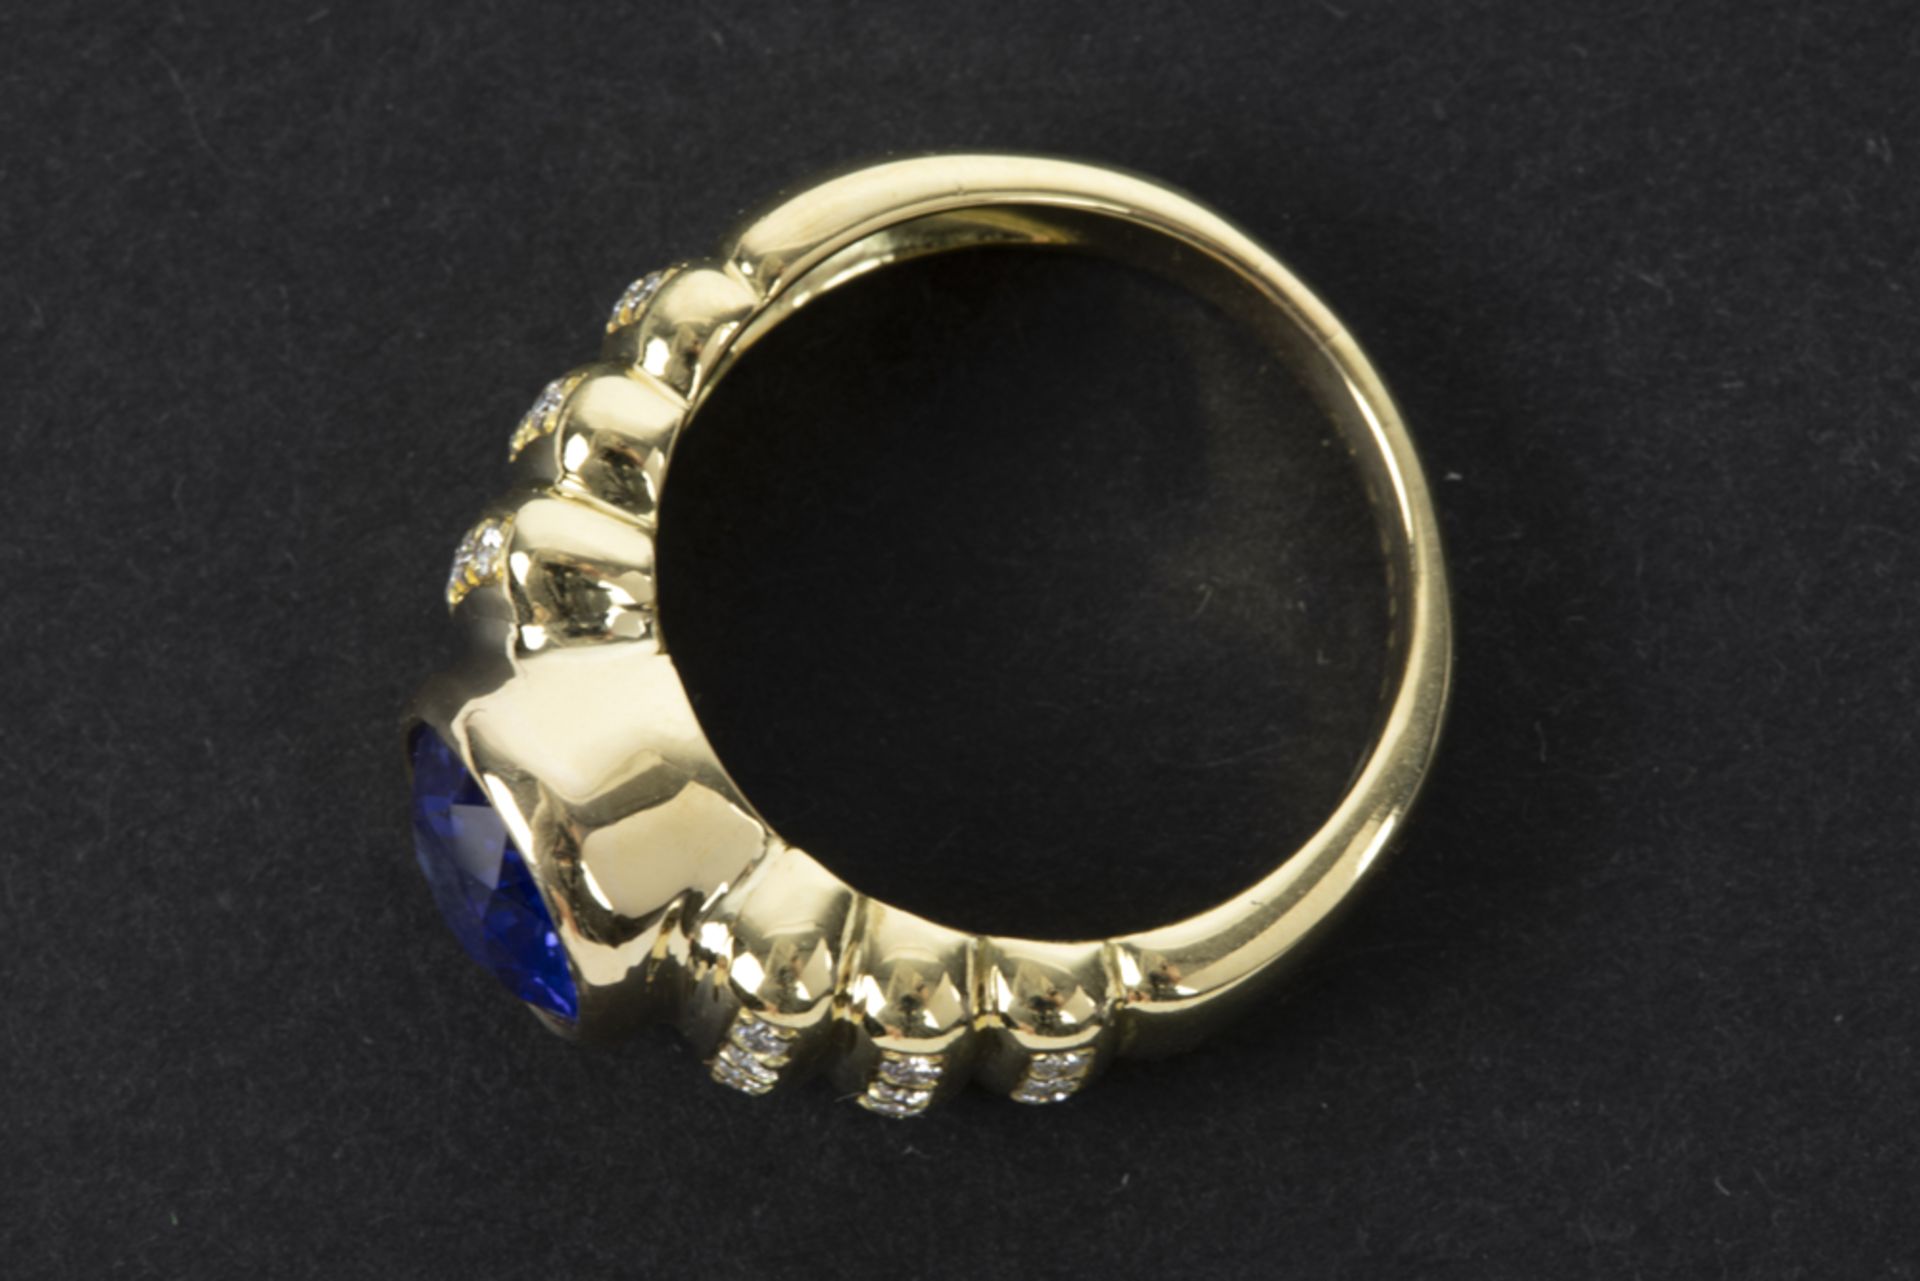 superb 3,14 carat sapphire from Madagascar with an "intense/vivid blue" color set in a ring in white - Image 2 of 3